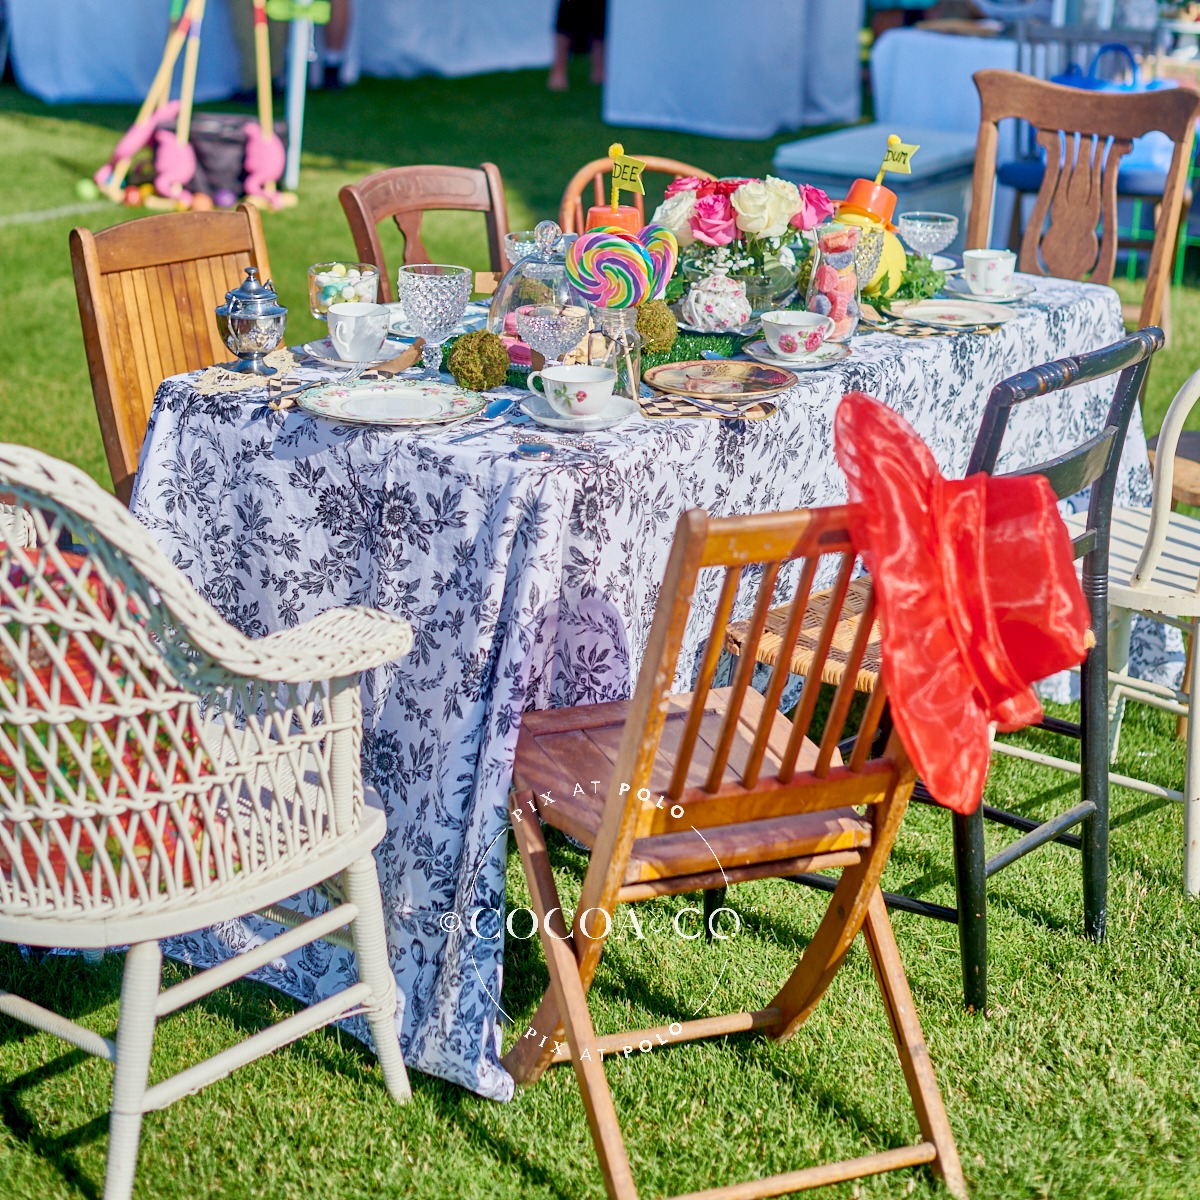 Decorate your tailgate at Newport Polo with the weekly @stellaartois Best in Show Theme through elaborate picnics with gourmet food, libations, and Newport Chic decor!  
#newportri #theclassiccoast #polo #tailgate @picnic
📸: @thecocoanco